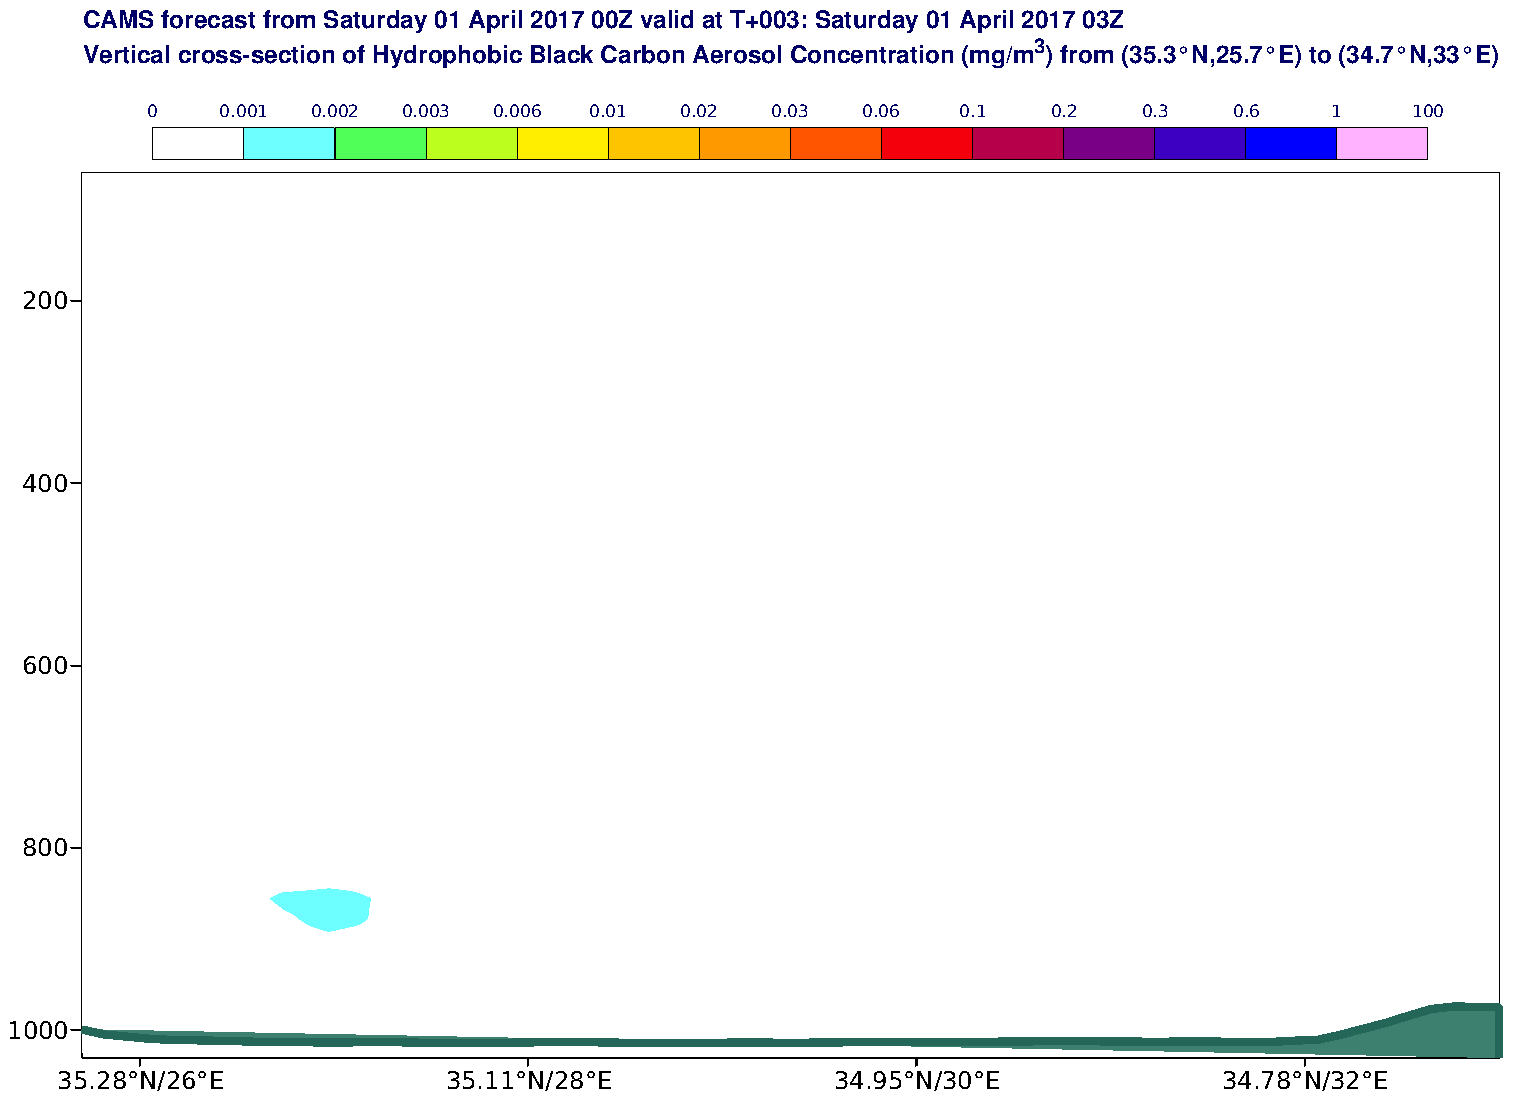 Vertical cross-section of Hydrophobic Black Carbon Aerosol Concentration (mg/m3) valid at T3 - 2017-04-01 03:00